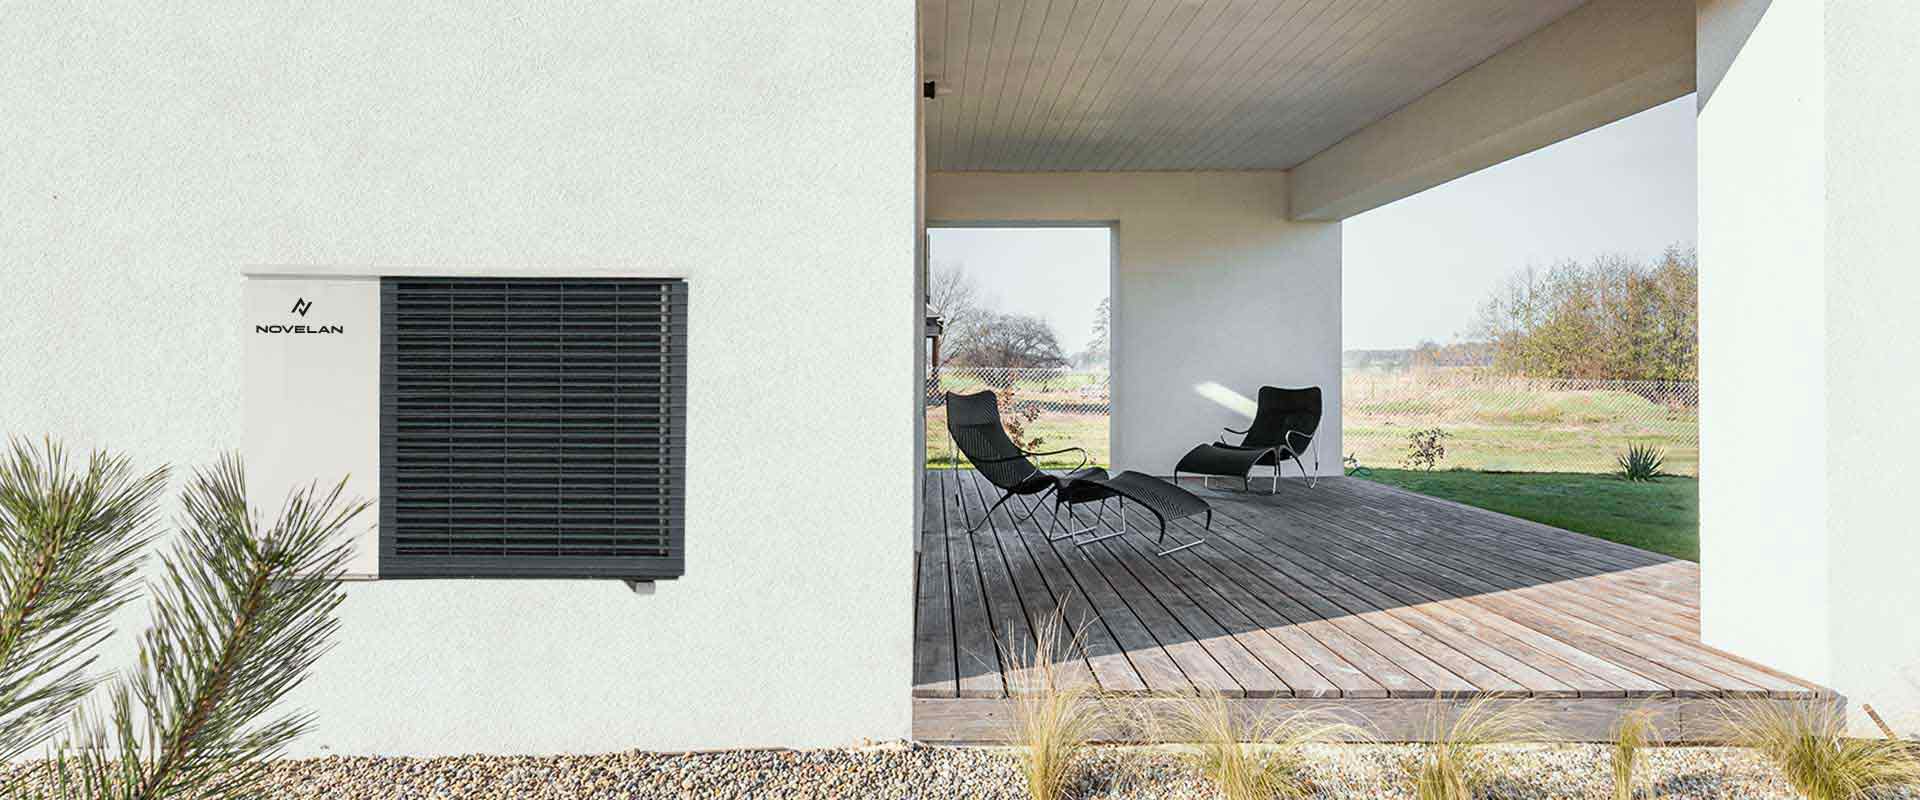 An air source heat pump is installed on a wall, above some decorative gravel and on the right, there is a terrace on the right with two sunbeds standing there.